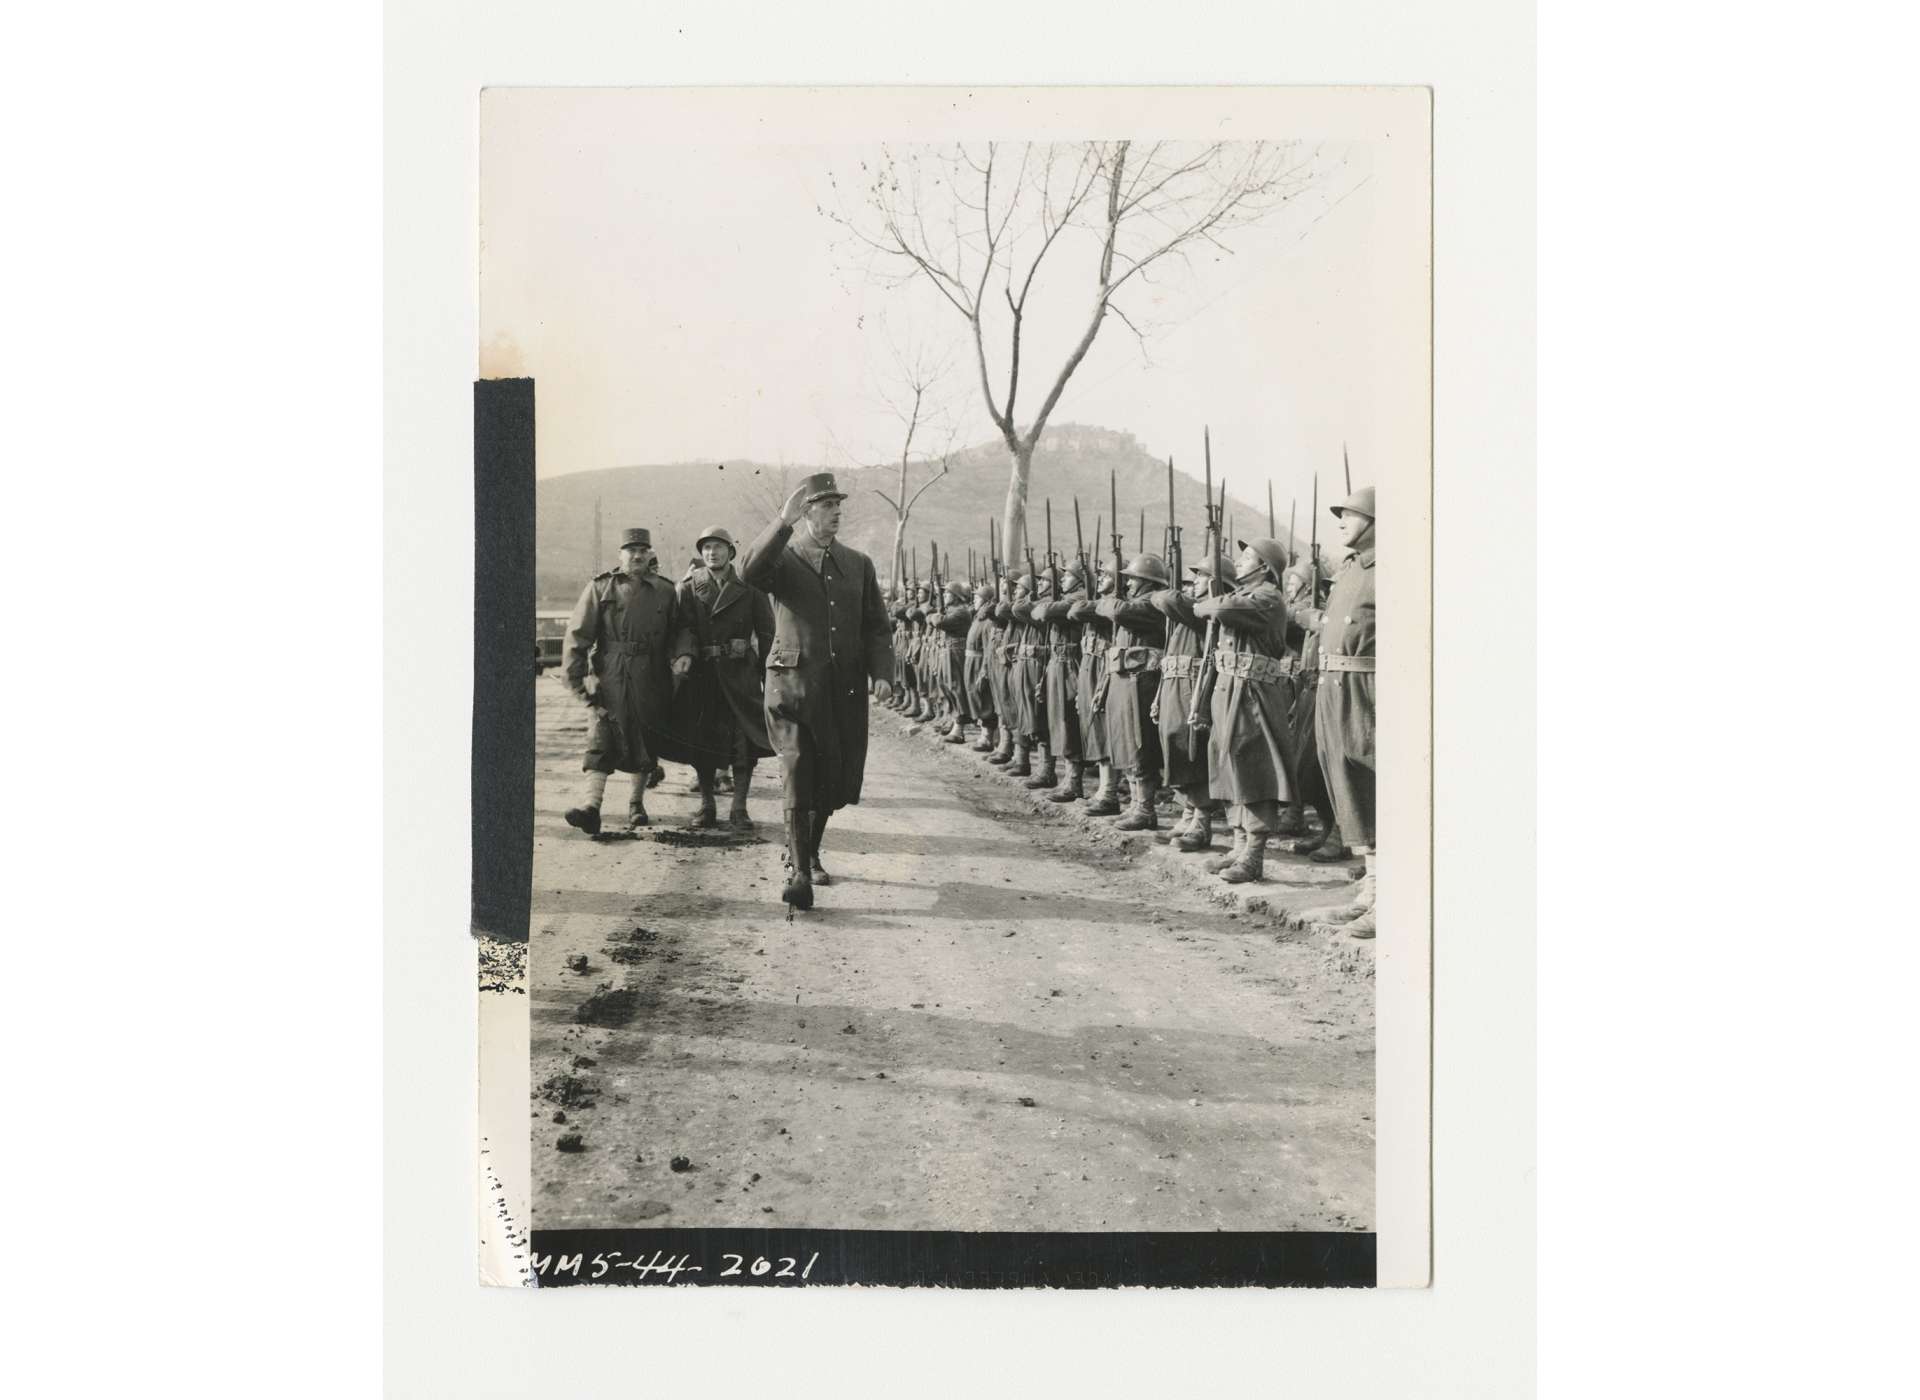 General Charles de Gaulle, Chairman of the French National Committee of Liberation, salutes the Honor Guard while reviewing Free French troops near Venafro, Italy, March 9, 1944. US Army Signal Corps photo, Gift of Ms. Regan Forrester, from the Collection of The National World War II Museum, 2002.337.142.